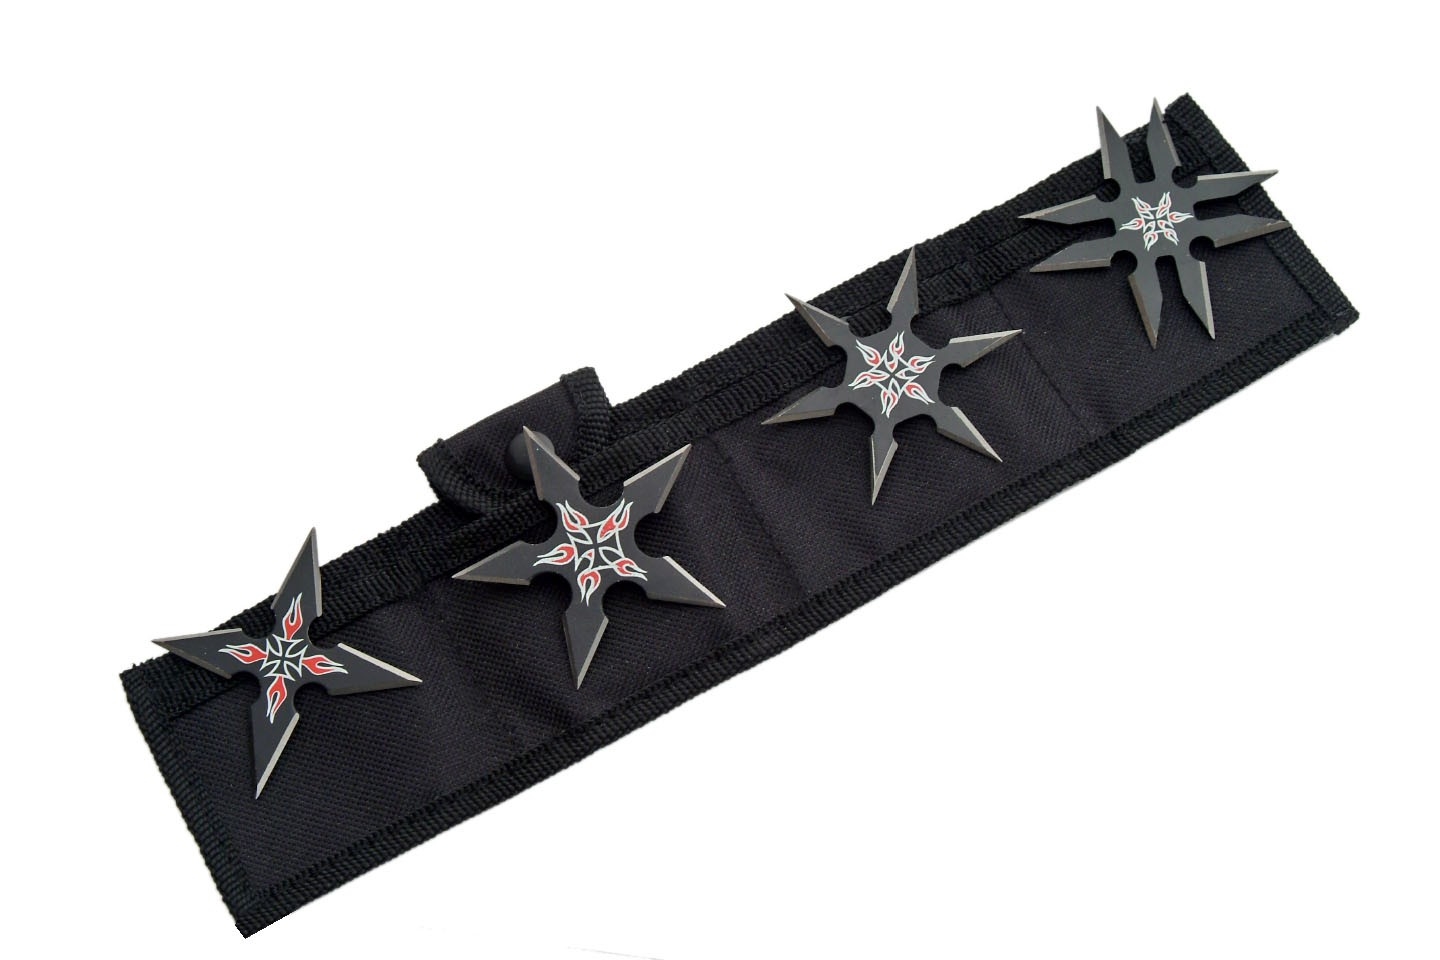 KNIFE 210816 Black w/Red Flame THROWING Stars